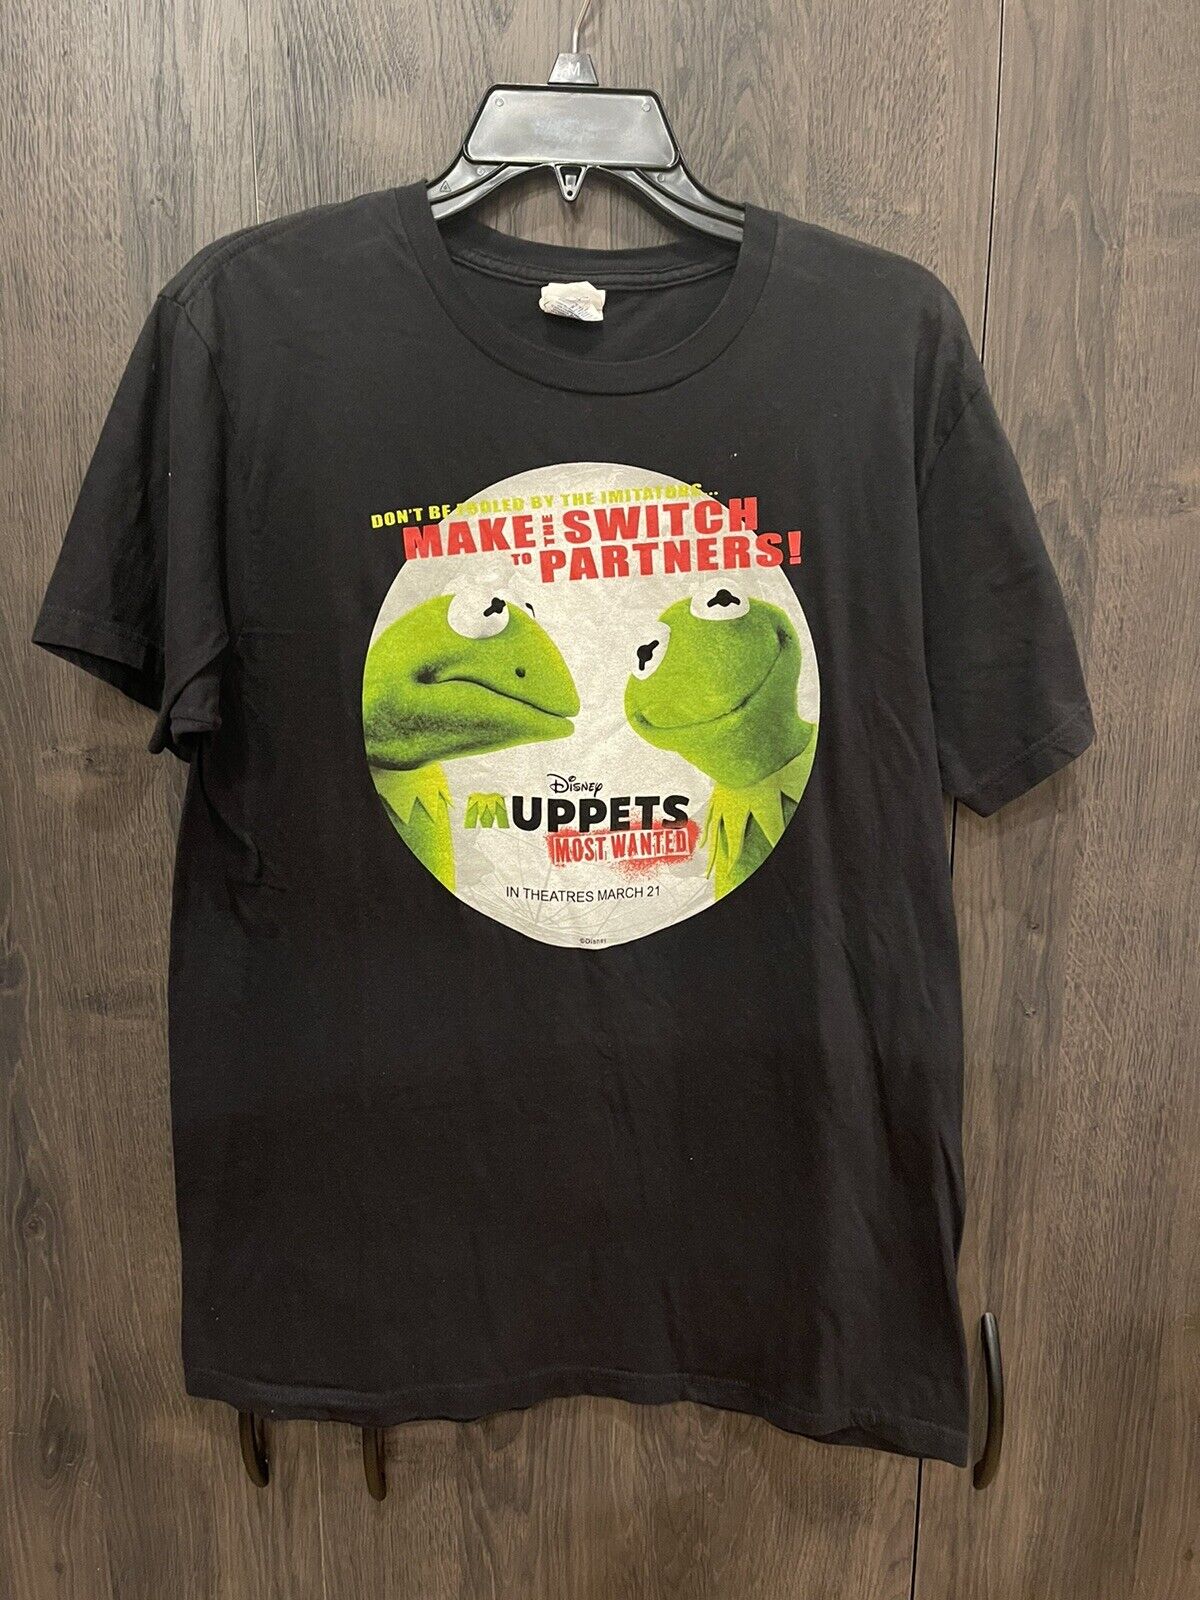 MUPPETS MOST WANTED movie rare promotional shirt Adult XL Kermit/Ms Piggy